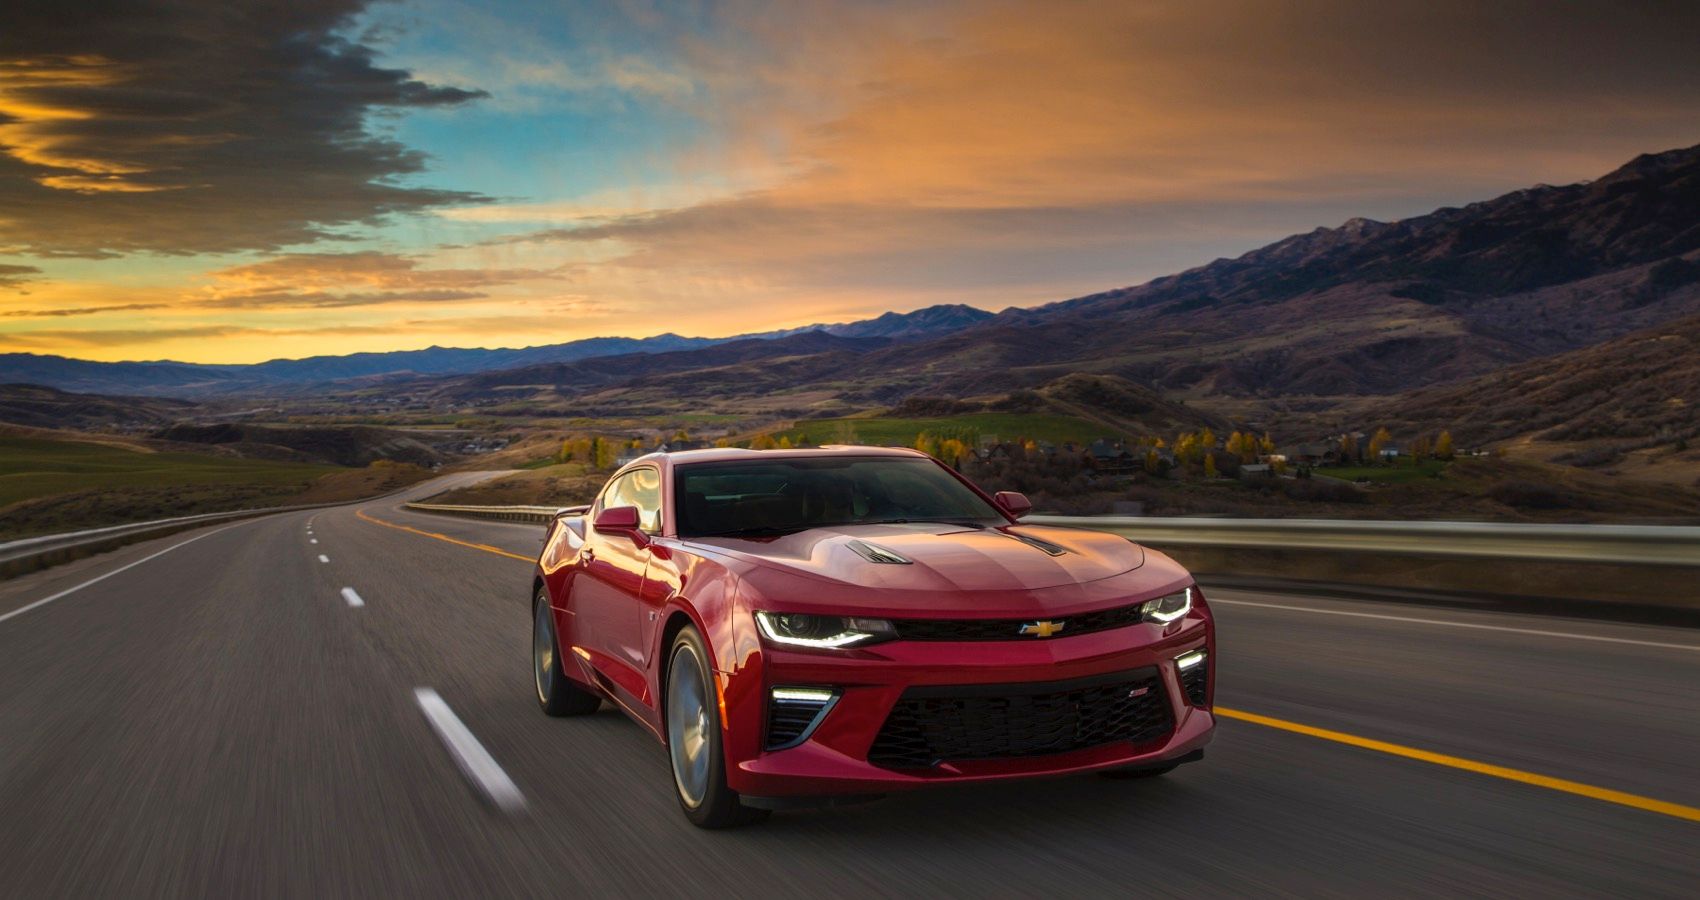 2018 Chevrolet Camaro SS in Cherry Front View